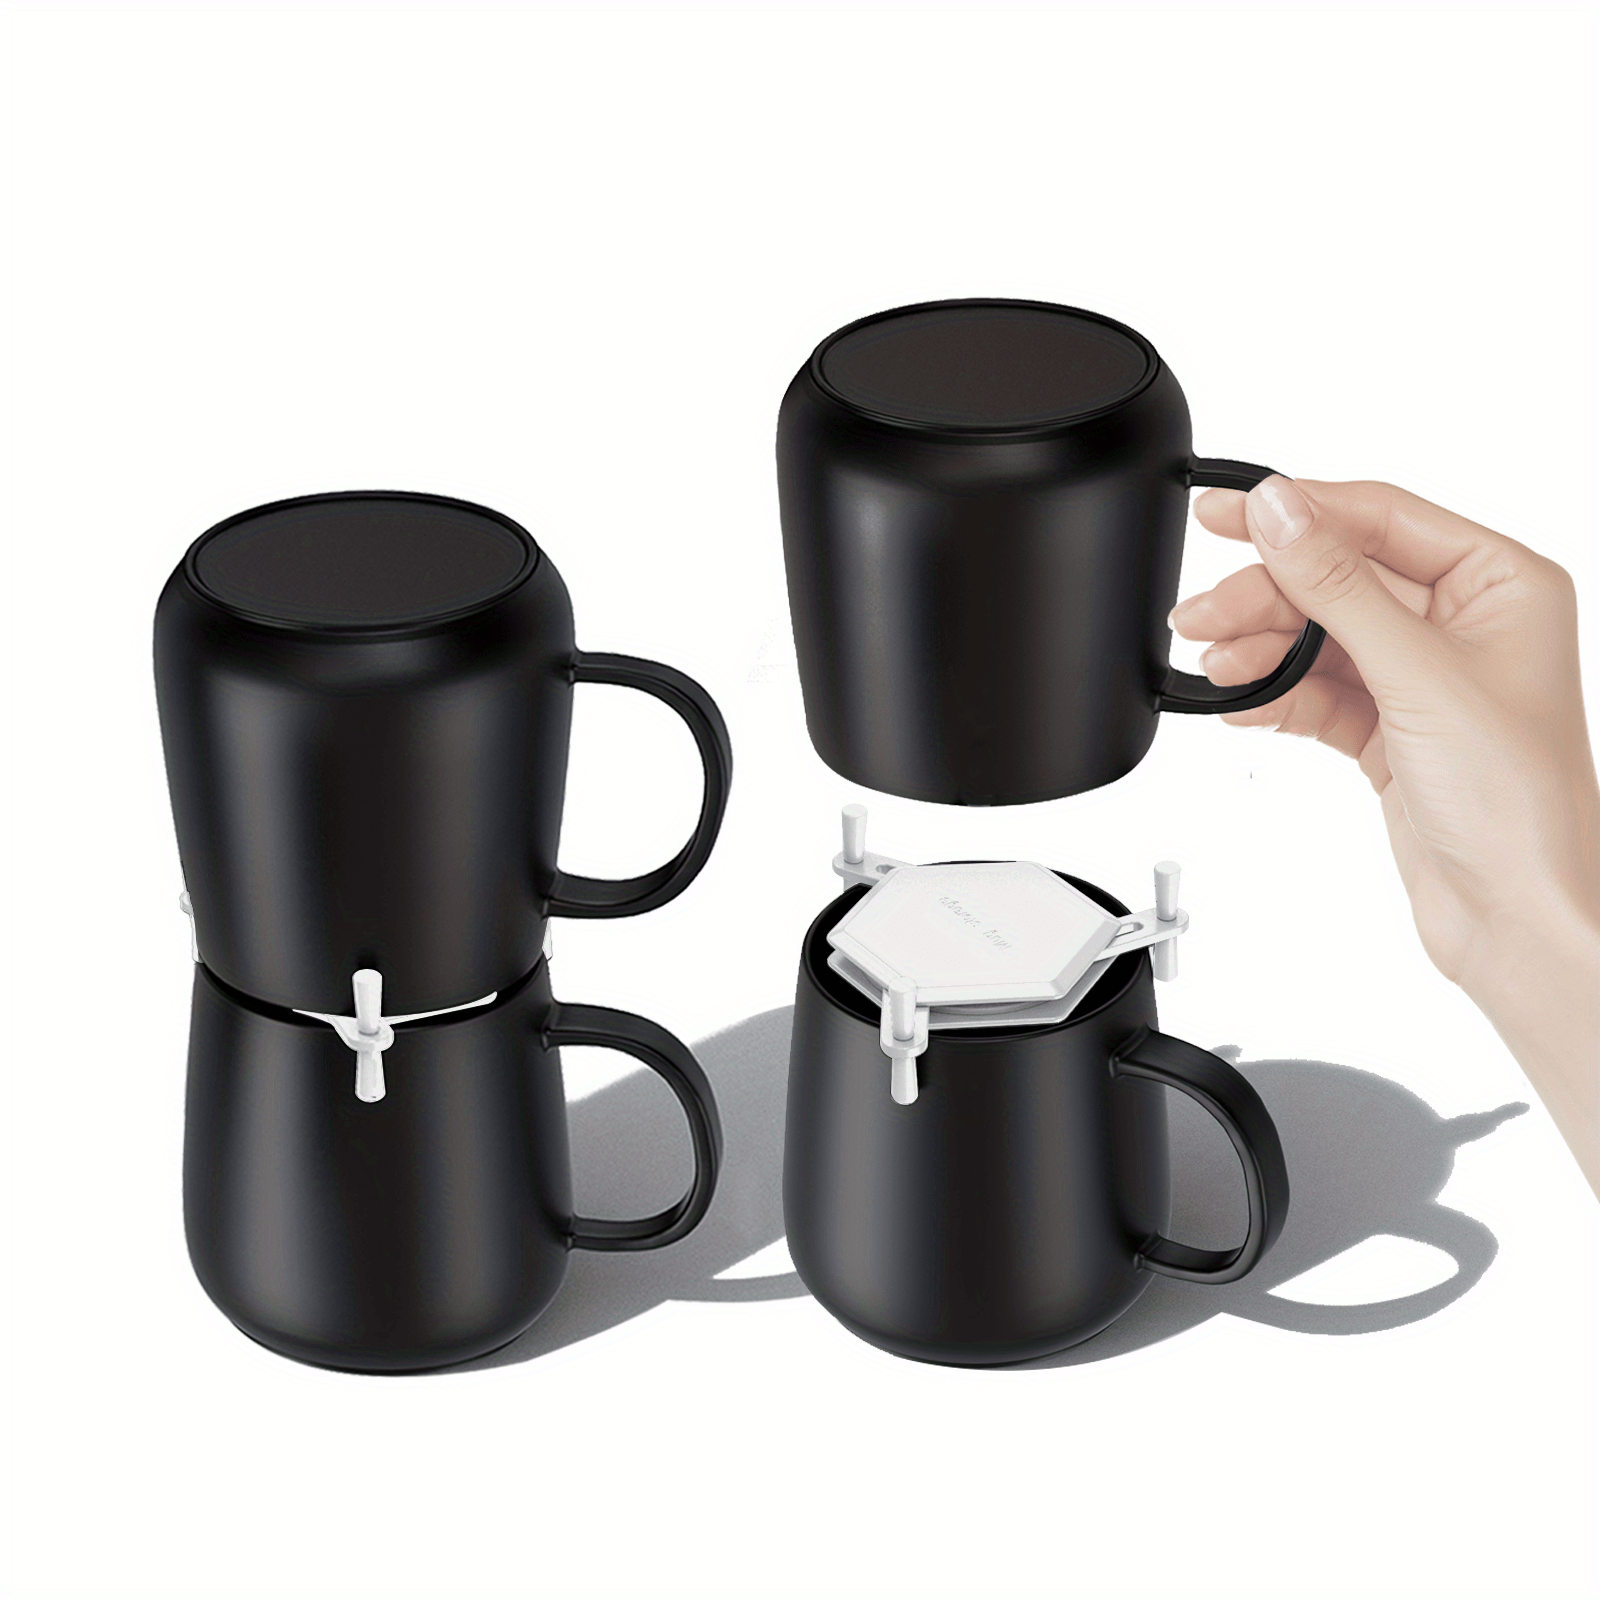 Williams Sonoma Pantry Essentials White Coffee Mugs with handle